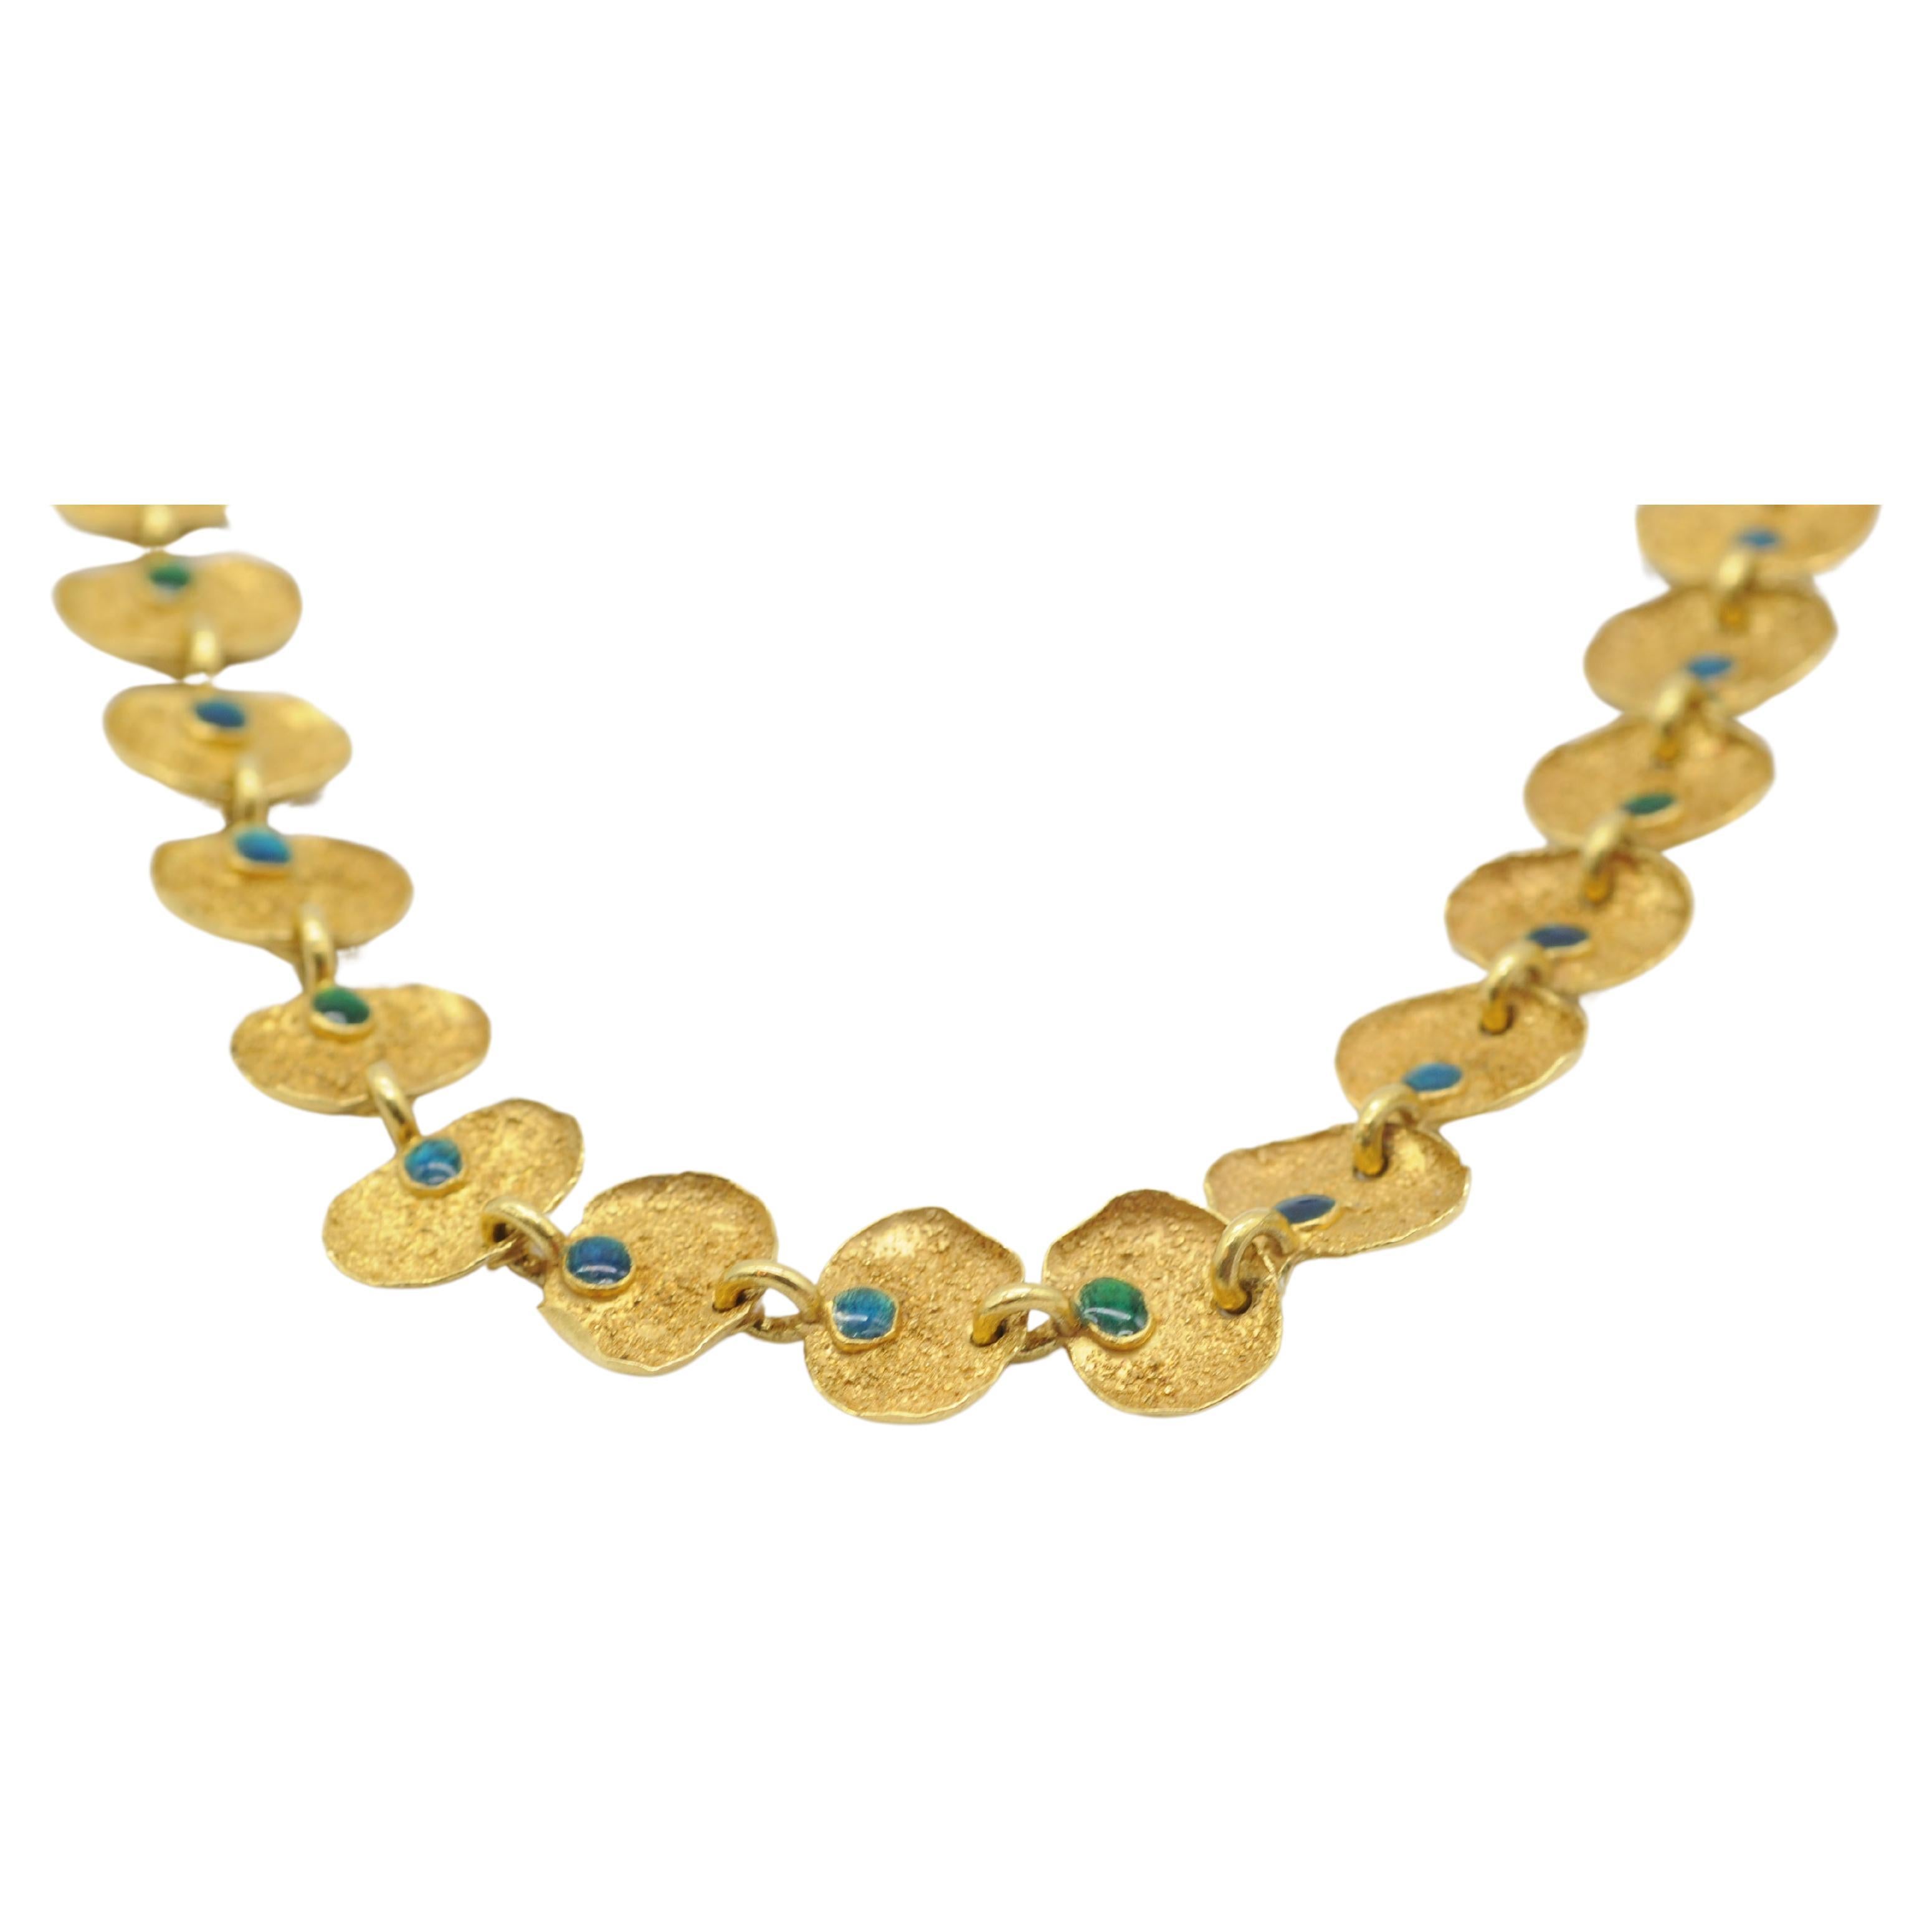 Behold the majesty of this exquisite piece, a masterpiece crafted by the skilled hands of an ancient German goldsmith, in 21.6k yellow gold. This stunning necklace exudes an aura of timeless elegance, sophistication, and beauty, making an